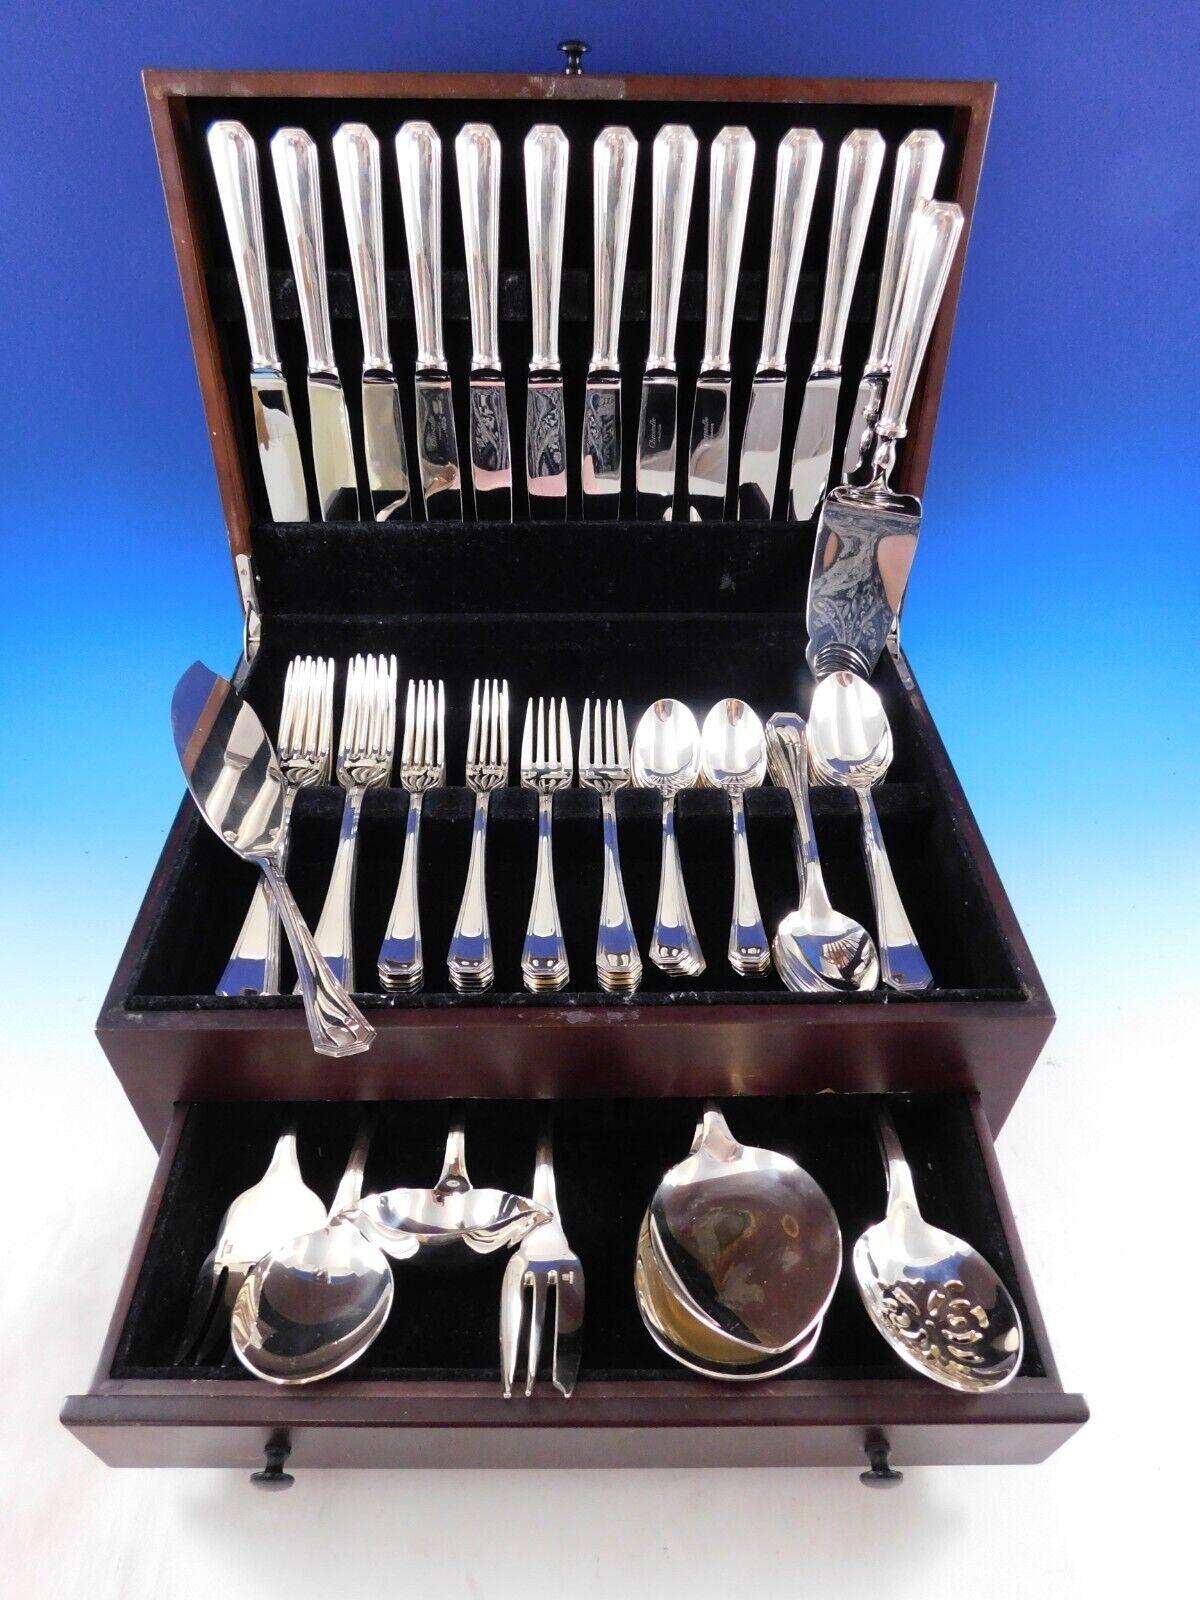 With a dedication to perfection and quality, Christofle flatware creations unite craftsmanship and modern technique, resulting in flatware to be handed down through generations.

America by Christofle France estate Silverplate Flatware set - 82